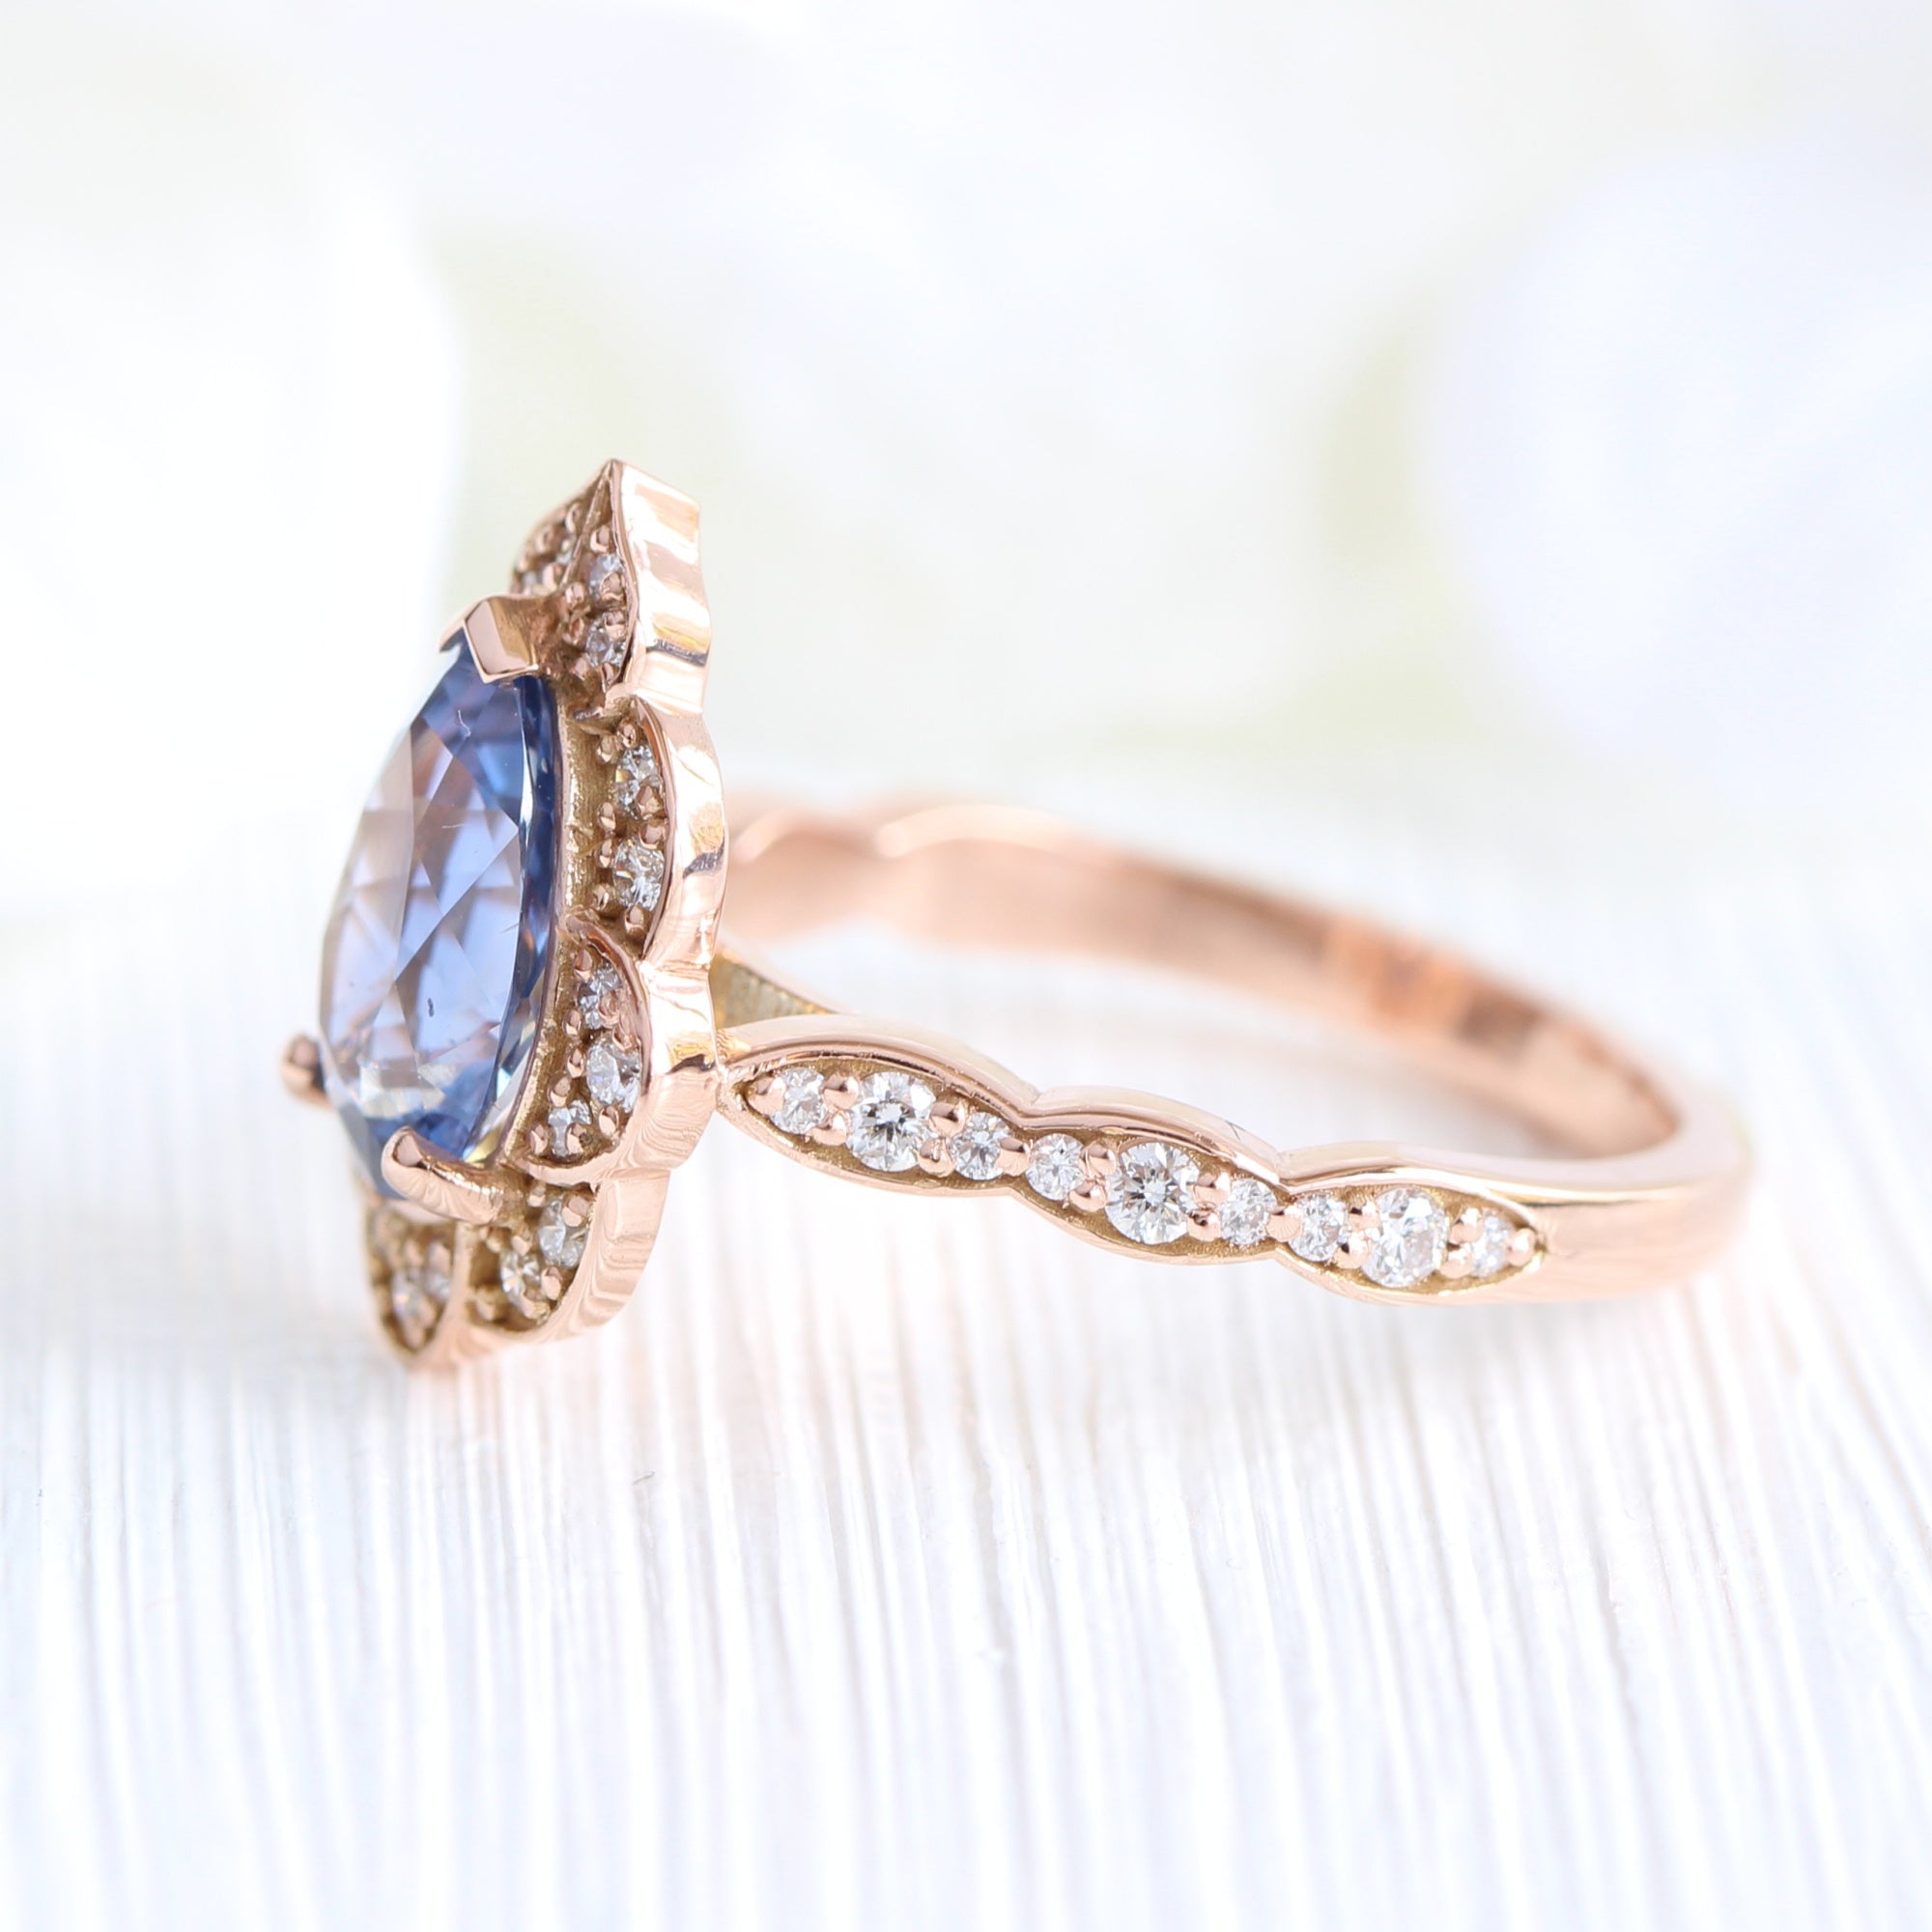 Large pear blue sapphire ring rose gold vintage halo diamond ring la more design jewelry